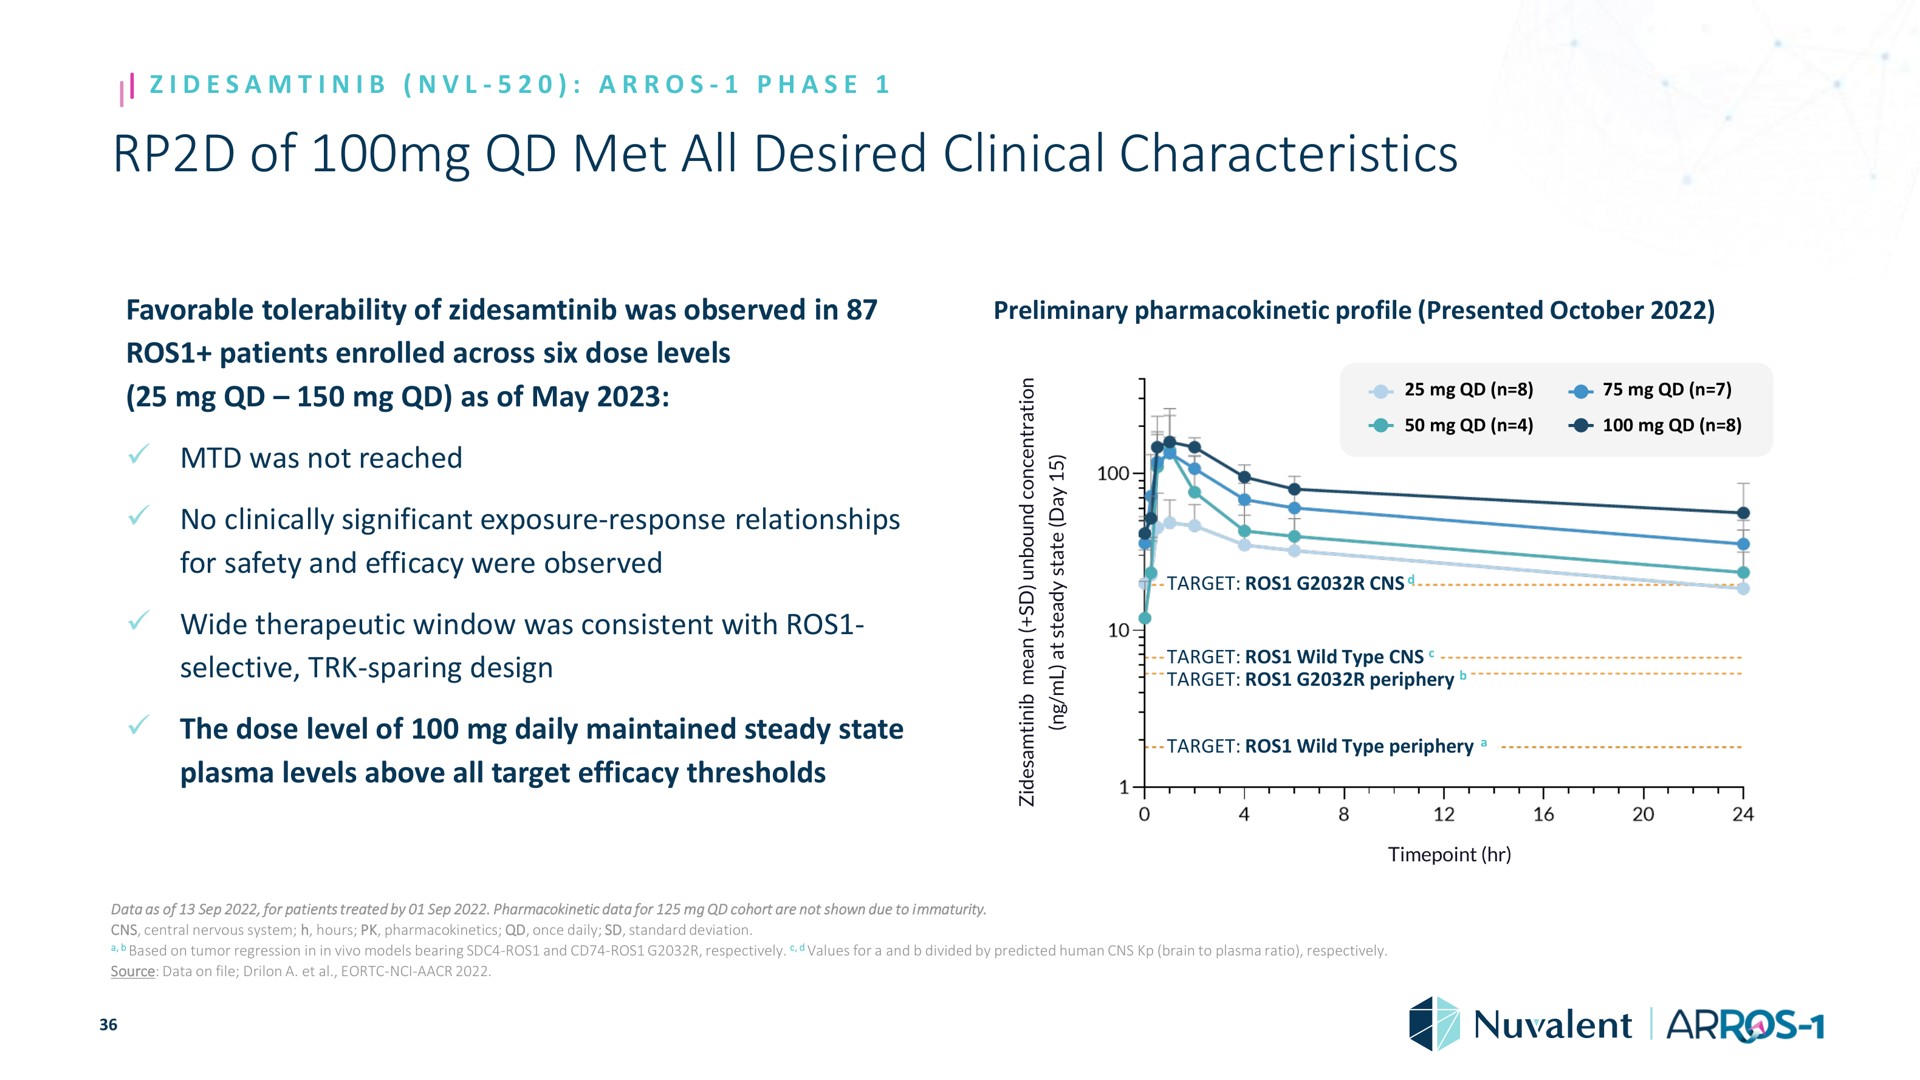 of met all desired clinical characteristics phase favorable tolerability was observed in preliminary profile presented patients enrolled across six dose levels as may was not reached no clinically significant exposure response relationships for safety and efficacy were observed wide therapeutic window was consistent with selective sparing design the dose level daily maintained steady state plasma levels above target efficacy thresholds i a a i i a i a a a a go me nes me yes target target wild type target periphery target wild type periphery data as for patients treated by data for cohort are not shown due to immaturity centra based hours once daily standard deviation on in in models and respectively values for a and divided by predicted human brain to plasma ratio respectively on file a source | Nuvalent